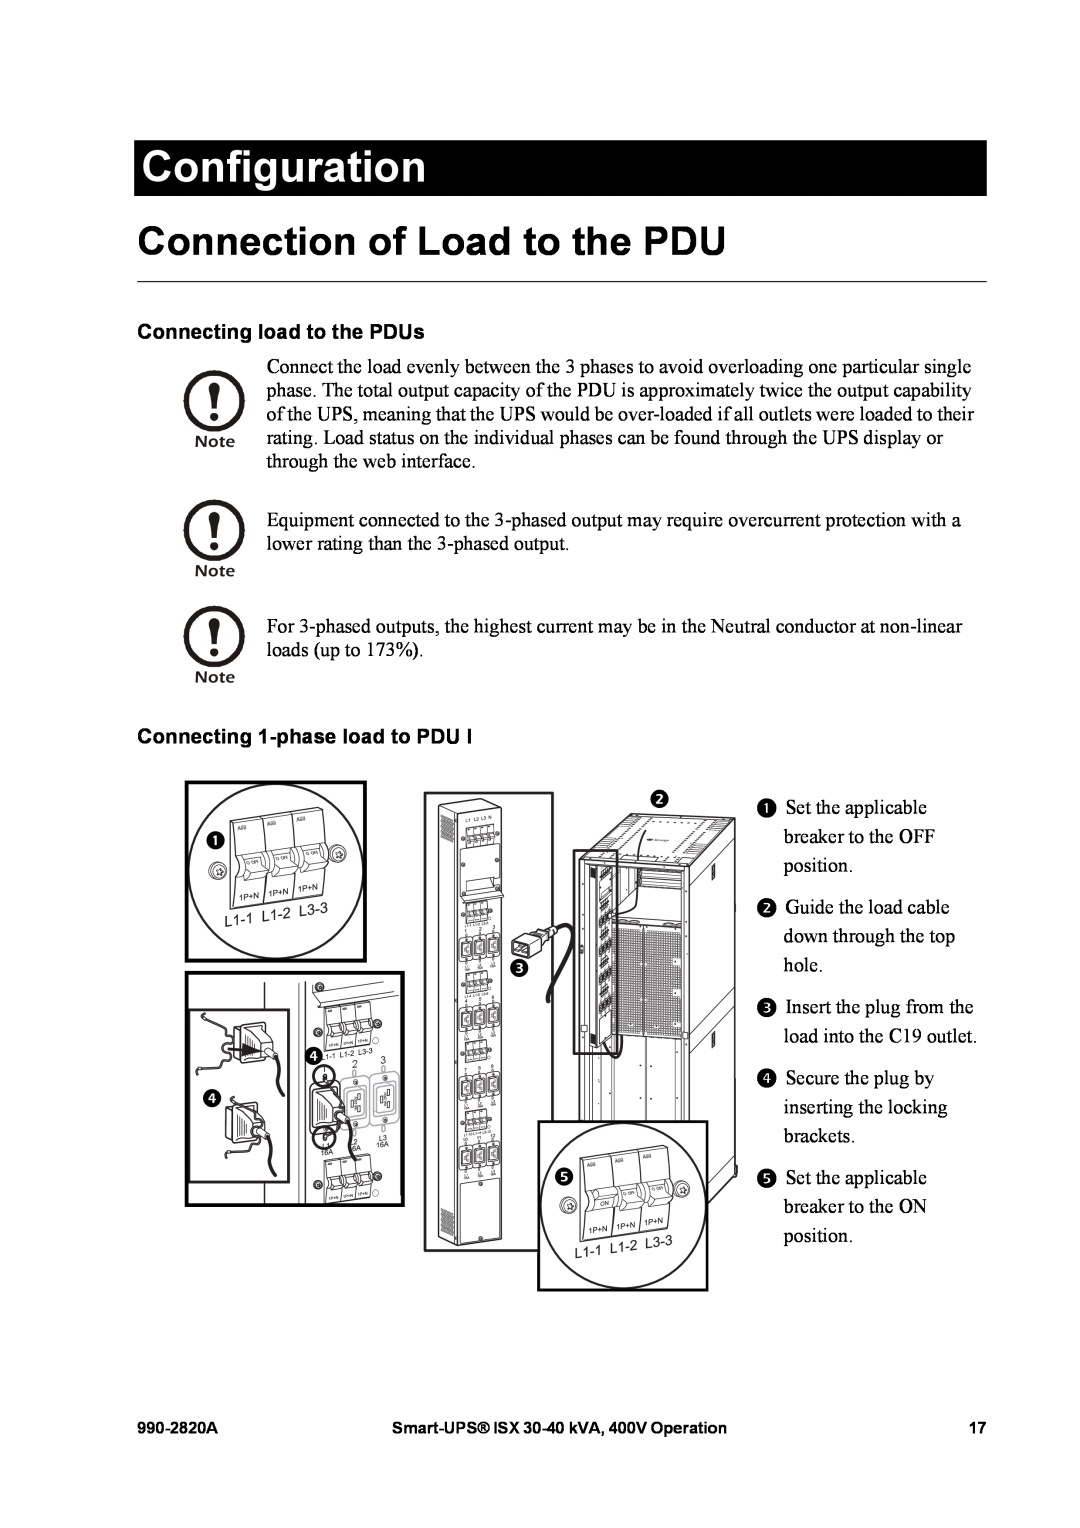 American Power Conversion VT ISX manual Configuration, Connection of Load to the PDU, Connecting load to the PDUs 